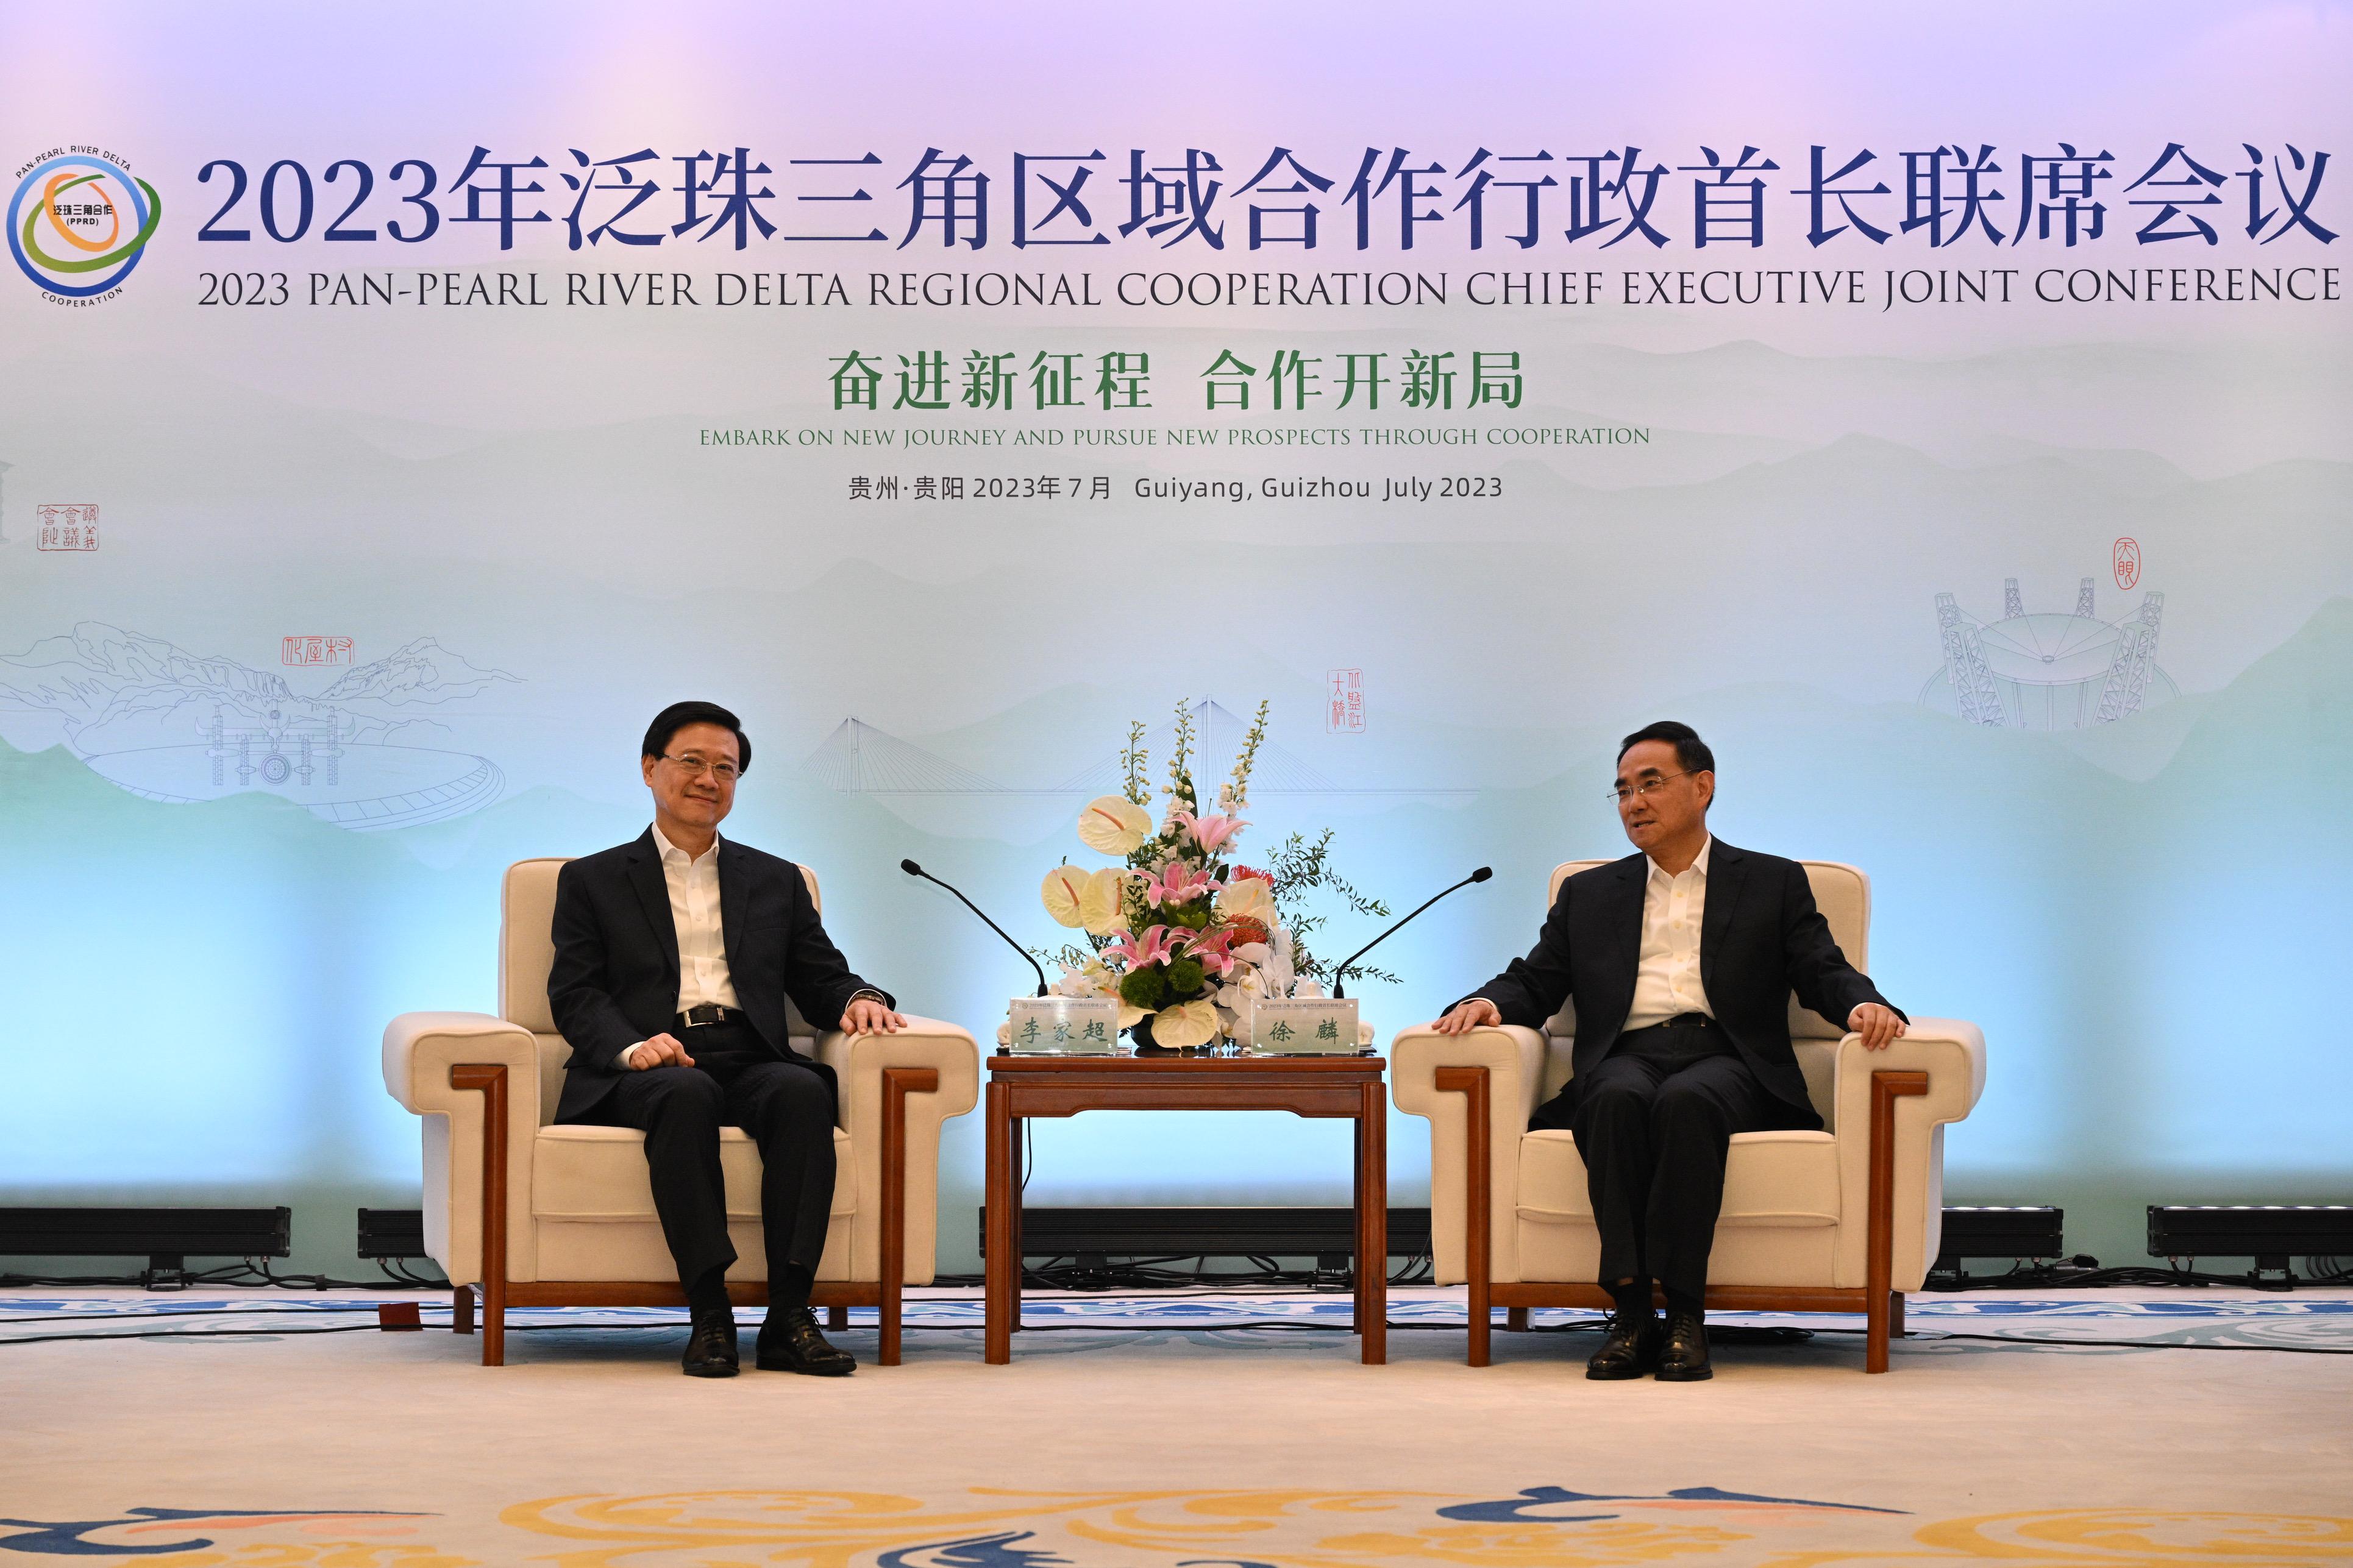 The Chief Executive, Mr John Lee, led a delegation to start his visit programme in Guiyang today (July 6). Photo shows Mr Lee (left) meeting with the Secretary of the CPC Guizhou Provincial Committee and Director of the Standing Committee of the Guizhou Provincial People's Congress, Mr Xu Lin (right), in Guiyang.